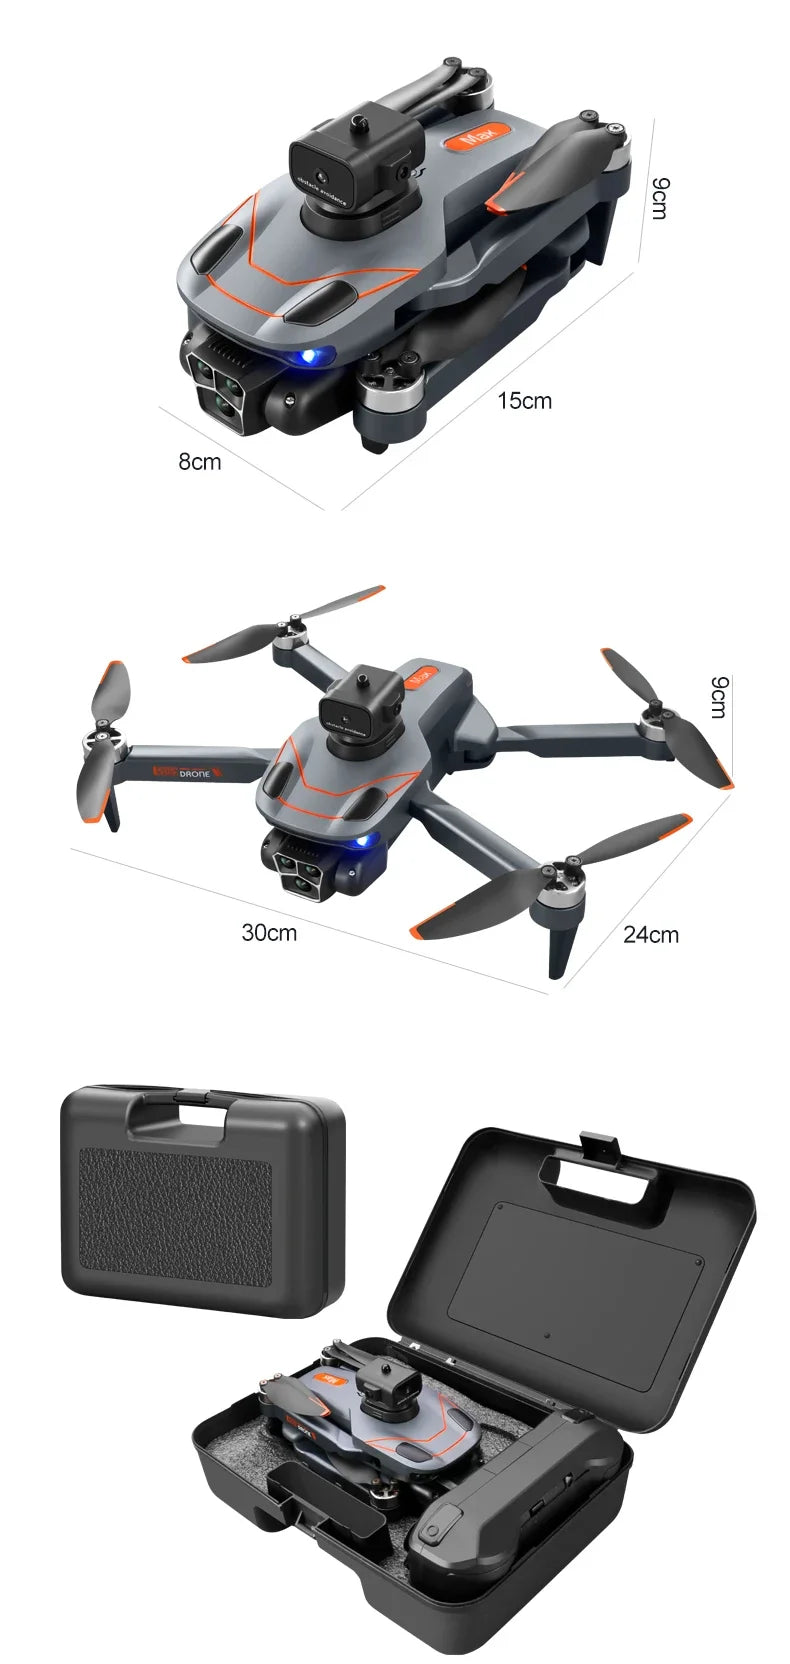 S115 Drone, the servo gimbal design increases stability, adding 